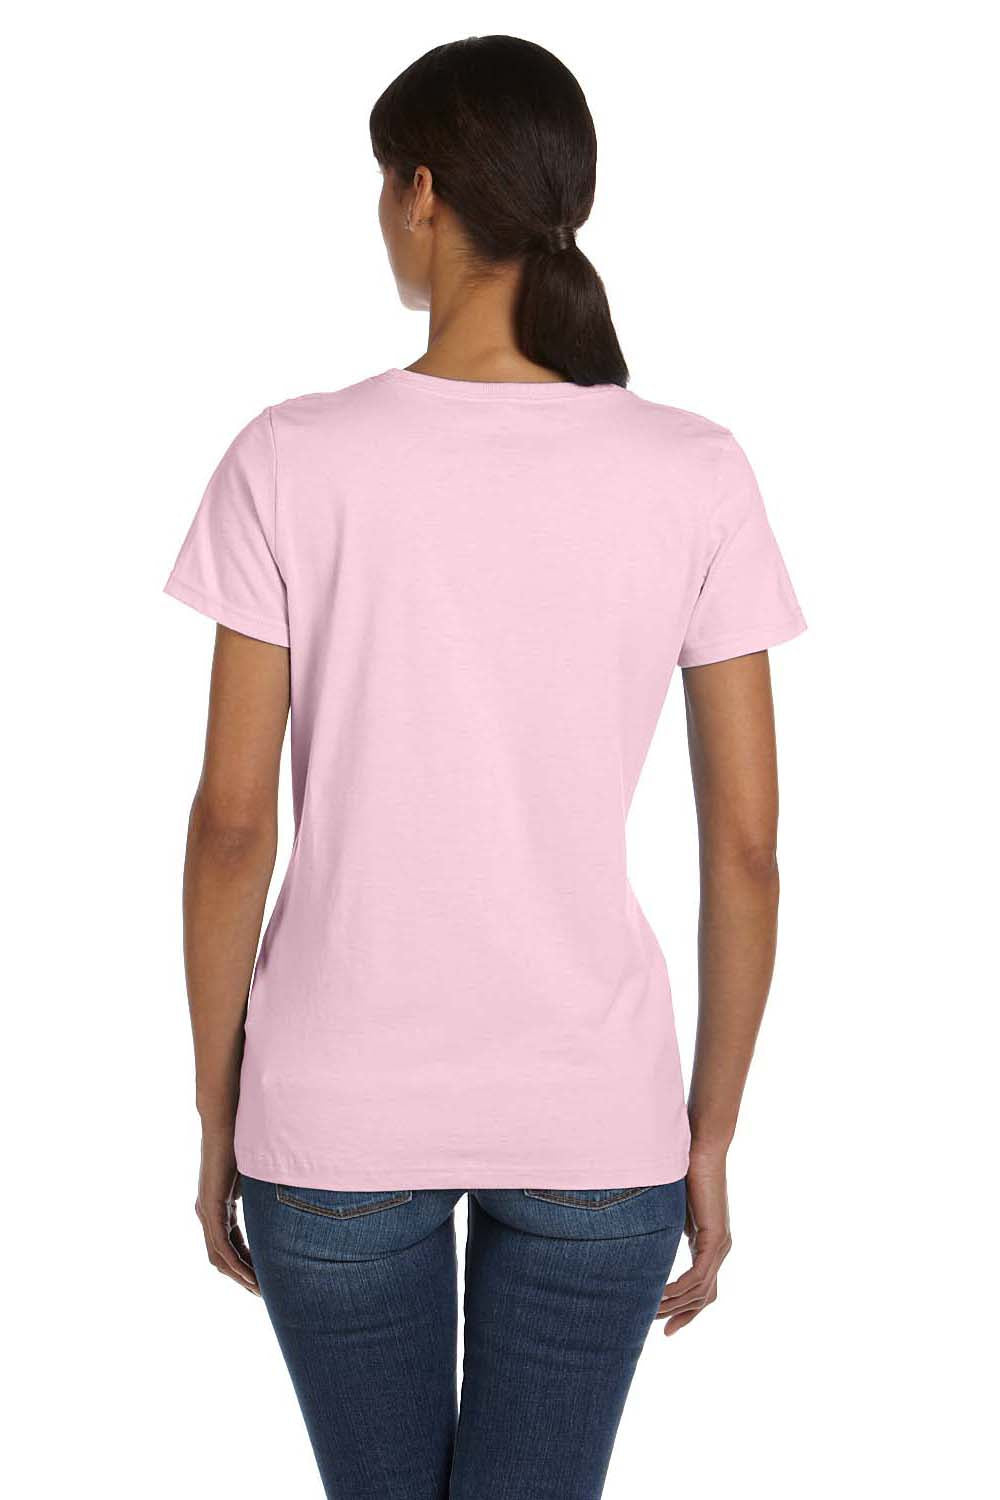 Fruit Of The Loom L3930R Womens HD Jersey Short Sleeve Crewneck T-Shirt Classic Pink Back